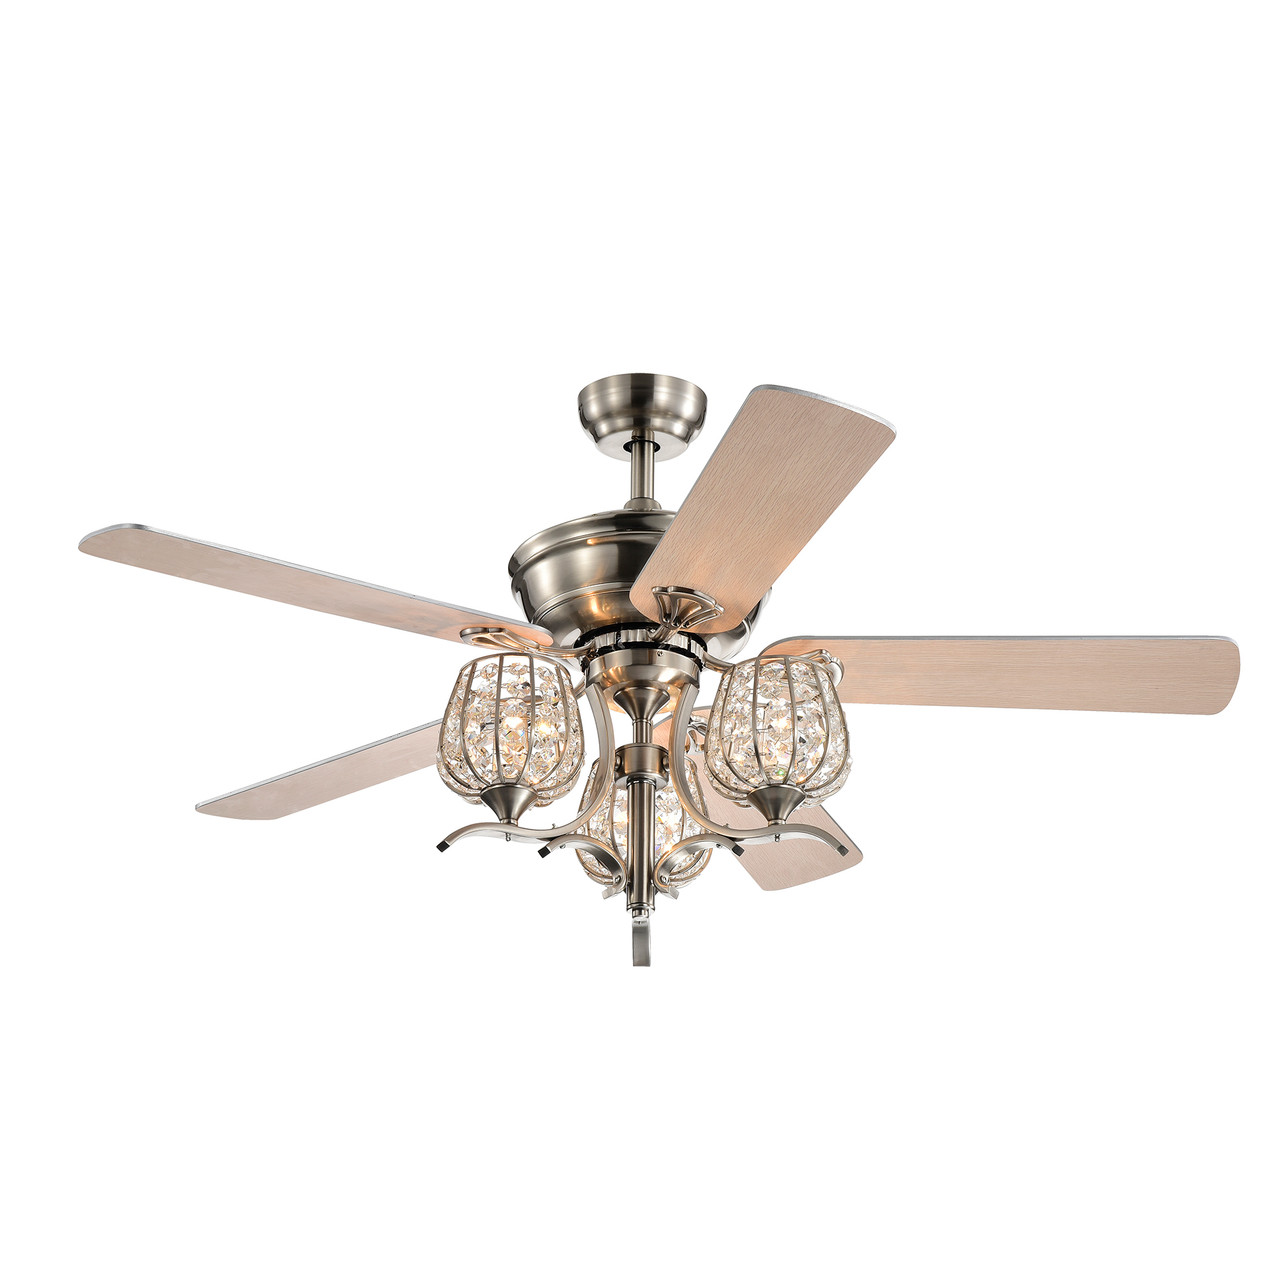 WAREHOUSE OF TIFFANY'S CFL-8426REMO/SN Boye 52 in. 3-Light Indoor Silver Finish Remote Controlled Ceiling Fan with Light Kit